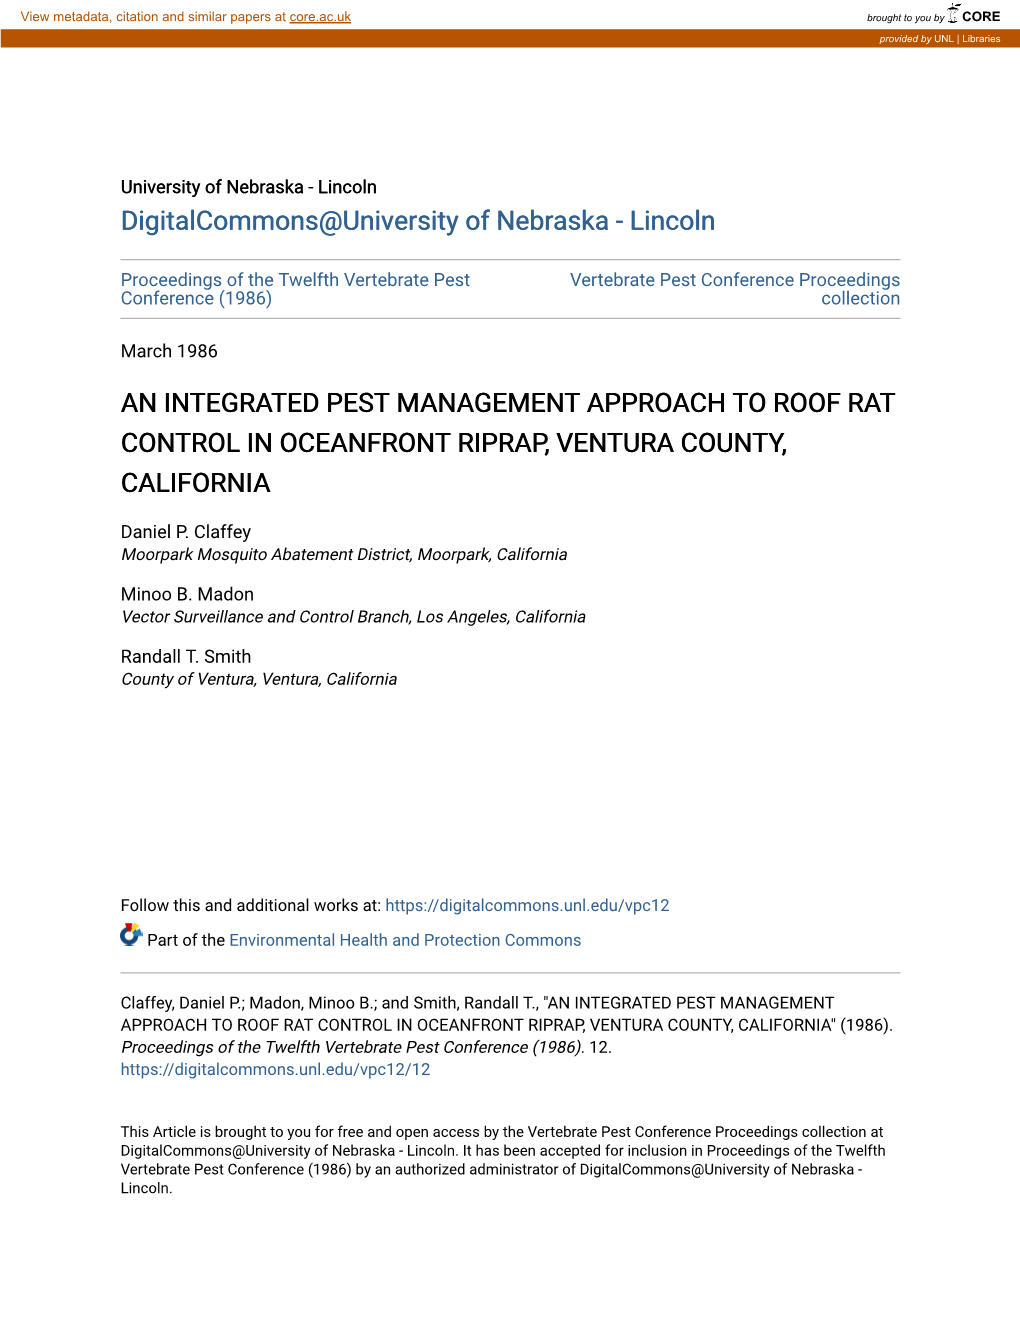 An Integrated Pest Management Approach to Roof Rat Control in Oceanfront Riprap, Ventura County, California